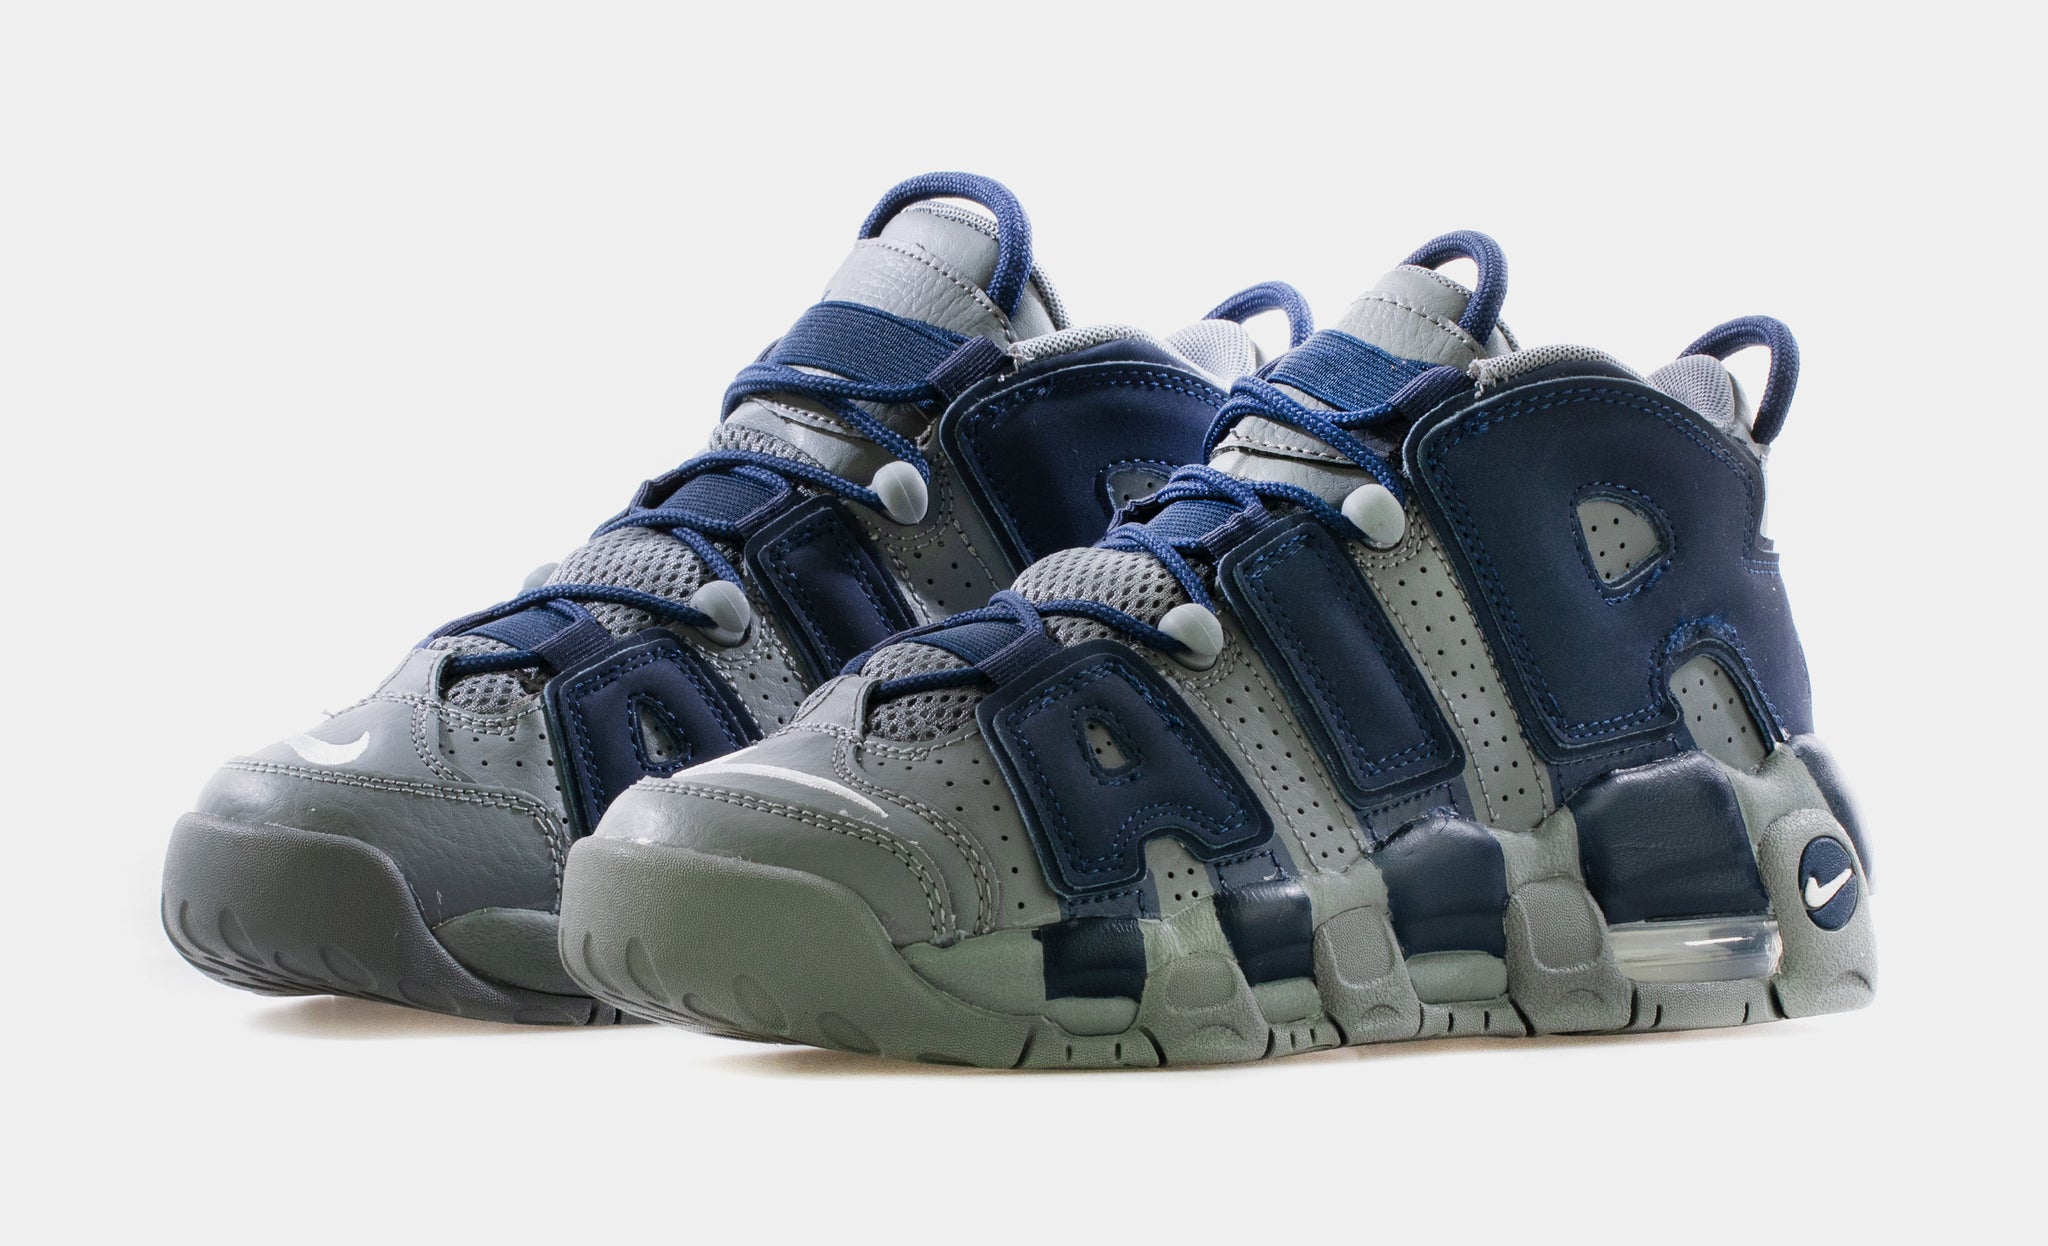 Are You Looking Forward To The Nike Air More Uptempo Scottie